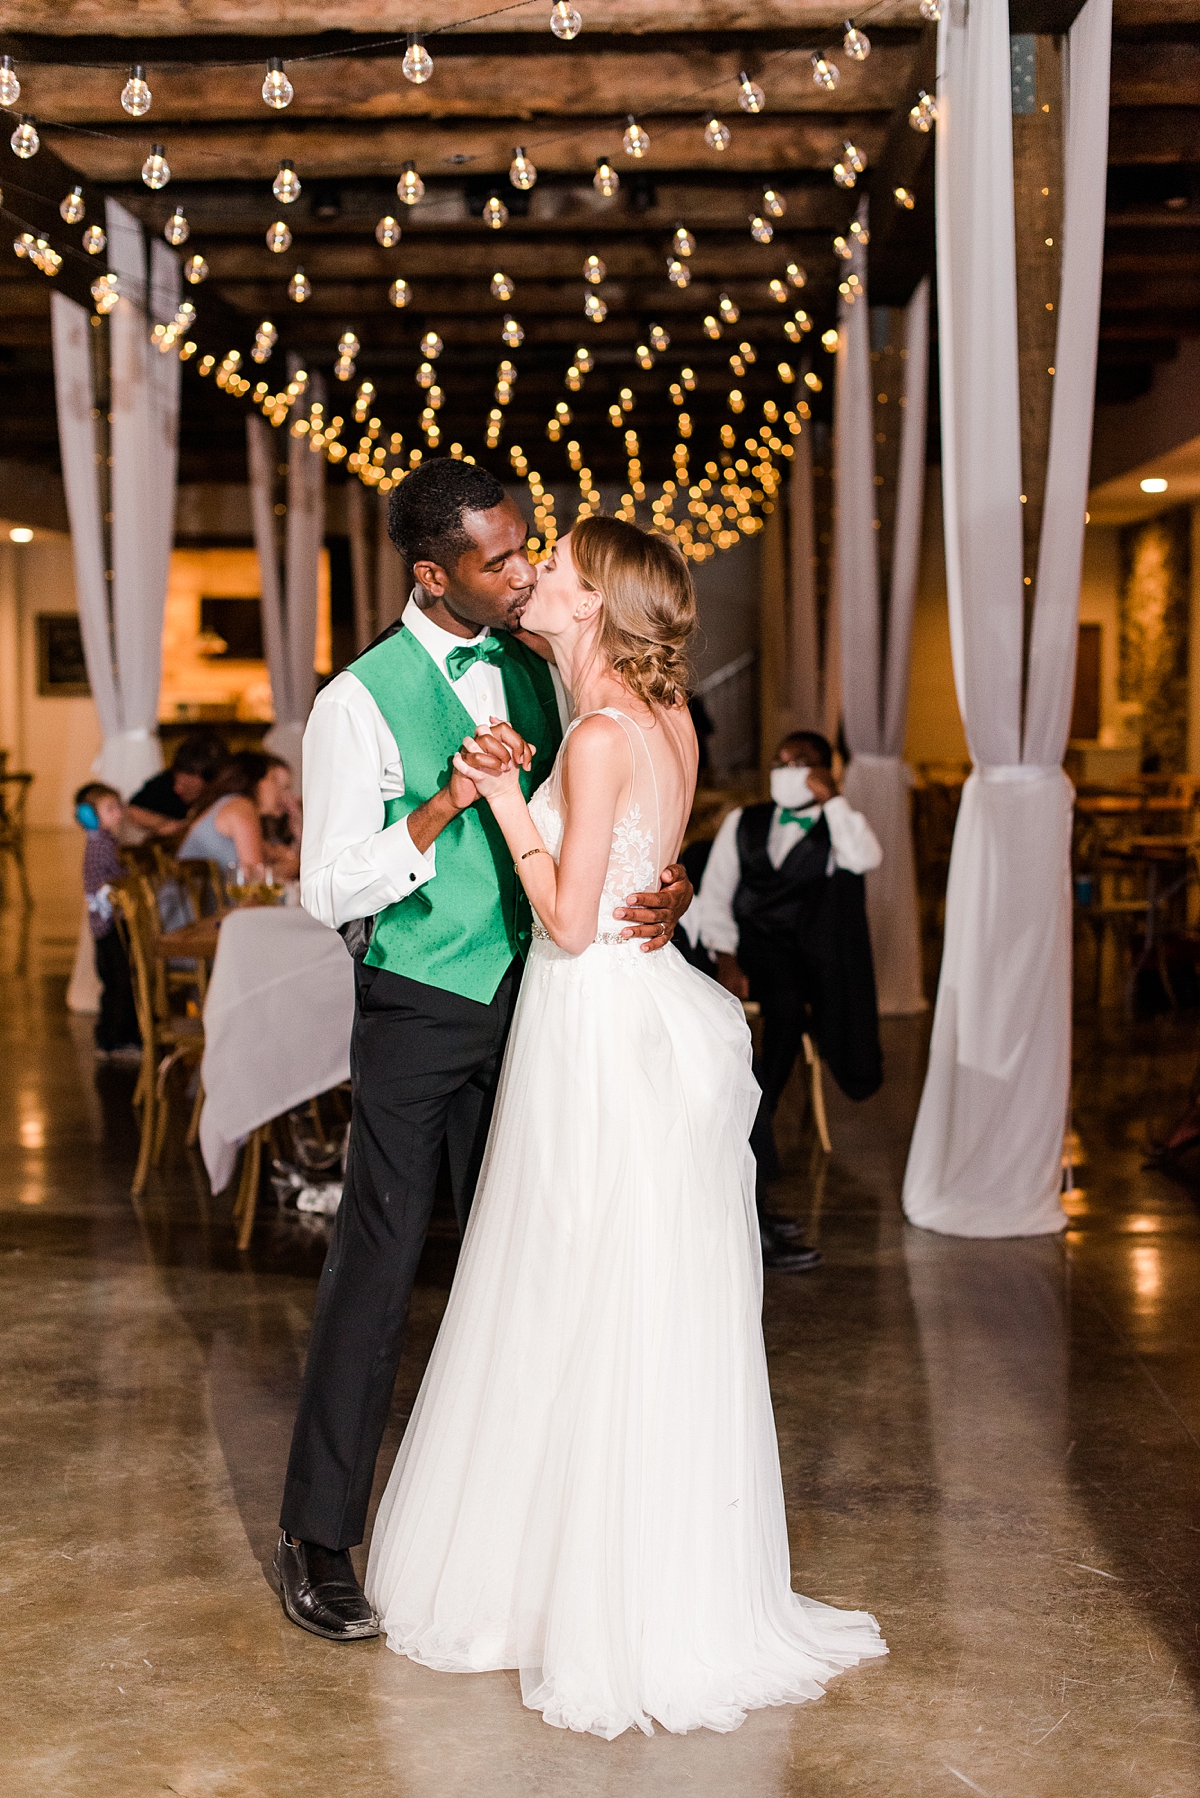 Bride and Groom Last Dance at Granary at Valley Pike Rustic Wedding Reception. Wedding Photography by Virginia Wedding Photographer Kailey Brianne Photography. 